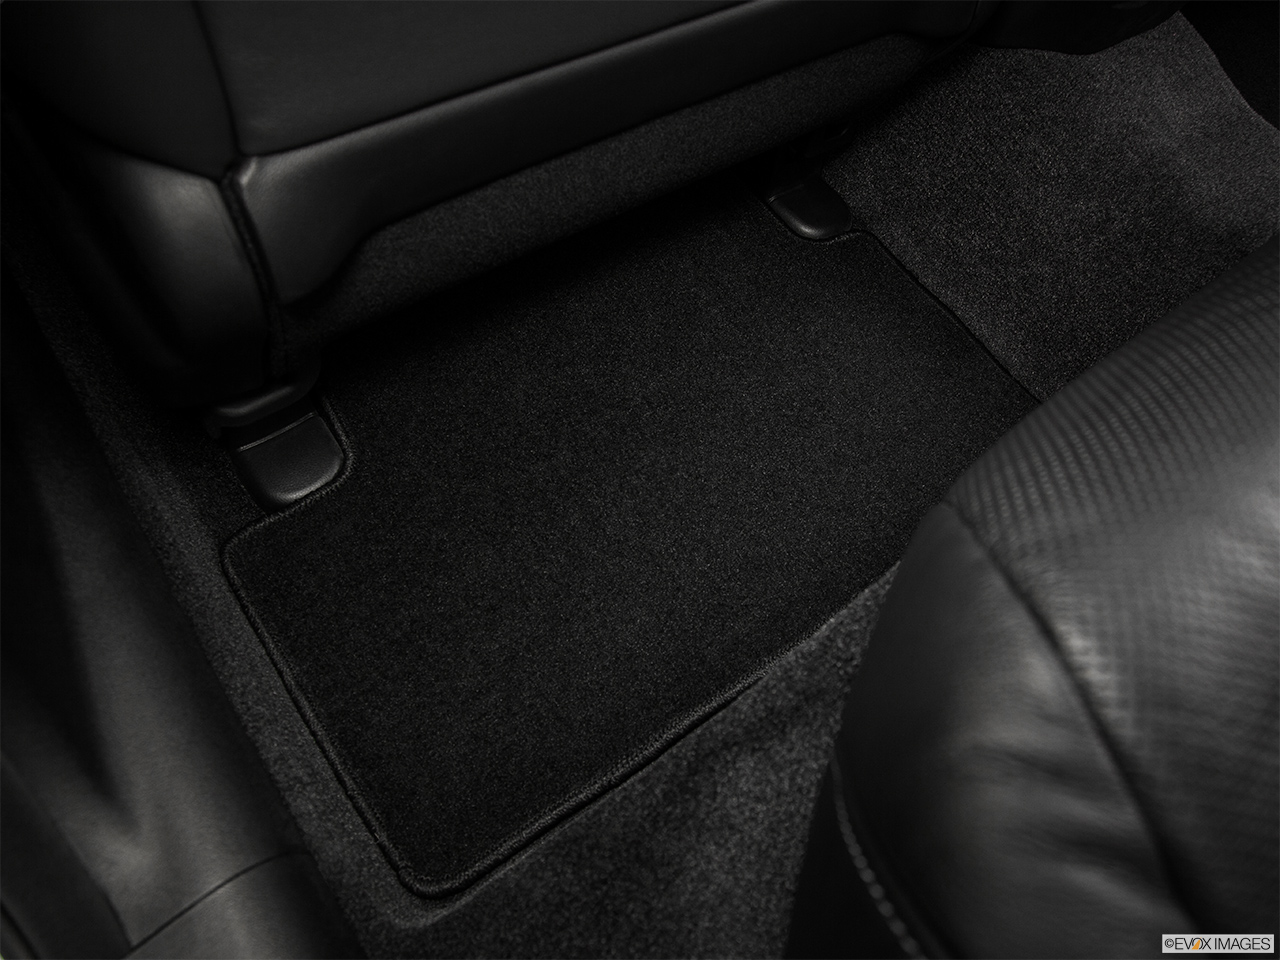 2014 Acura TSX 5-Speed Automatic Rear driver's side floor mat. Mid-seat level from outside looking in. 